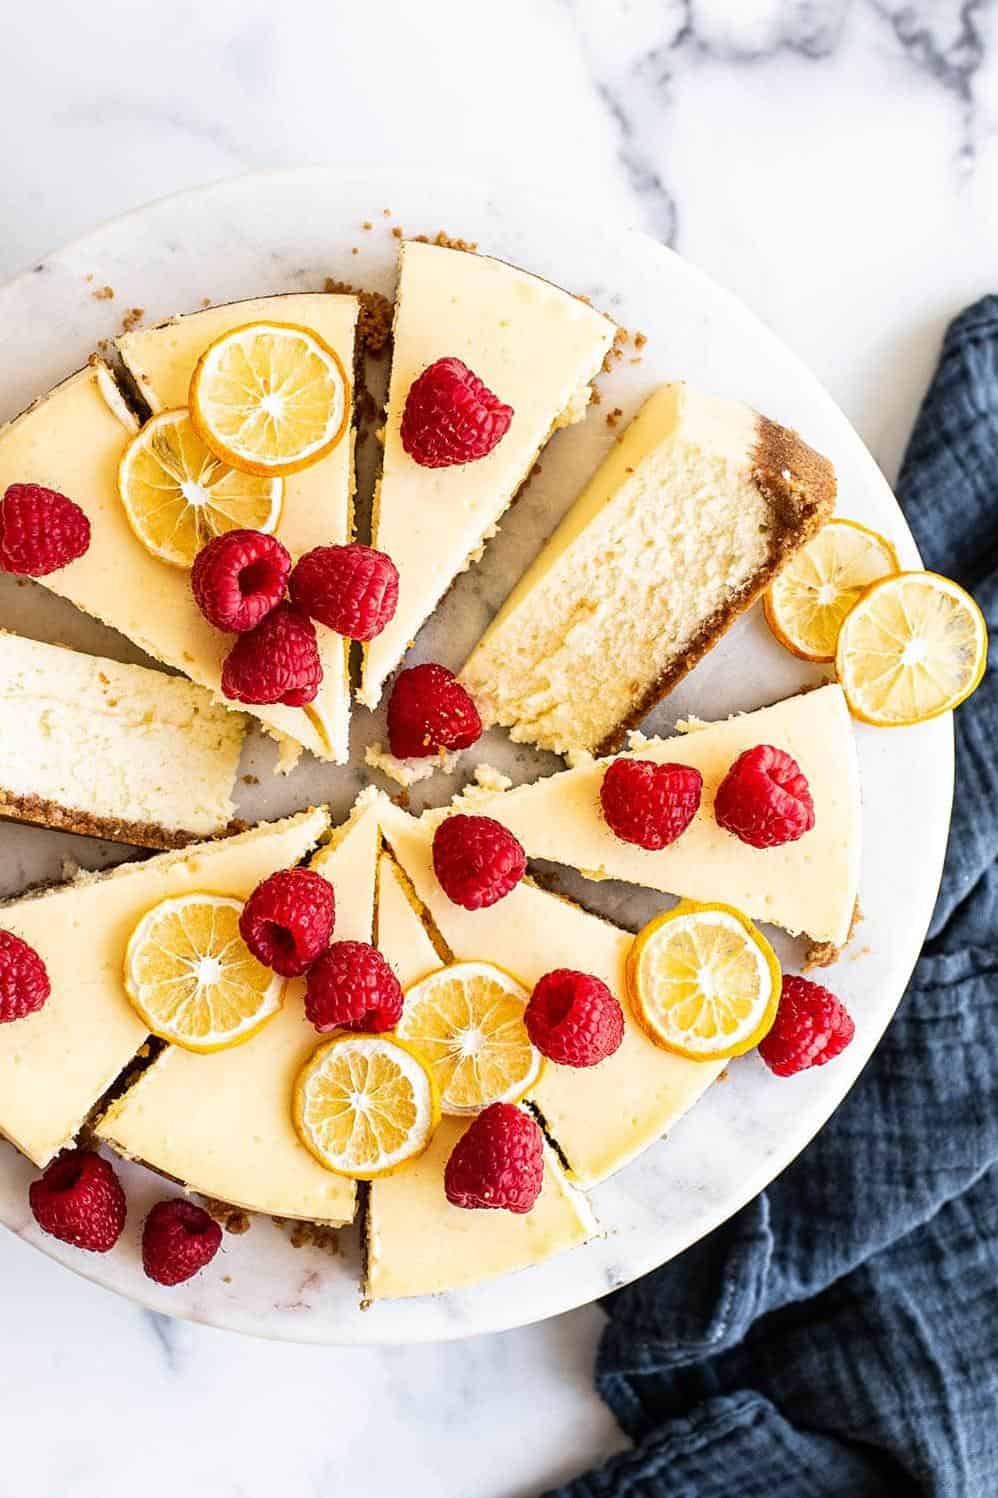  You won't be able to resist the smooth and rich texture of our ultimate cheesecake